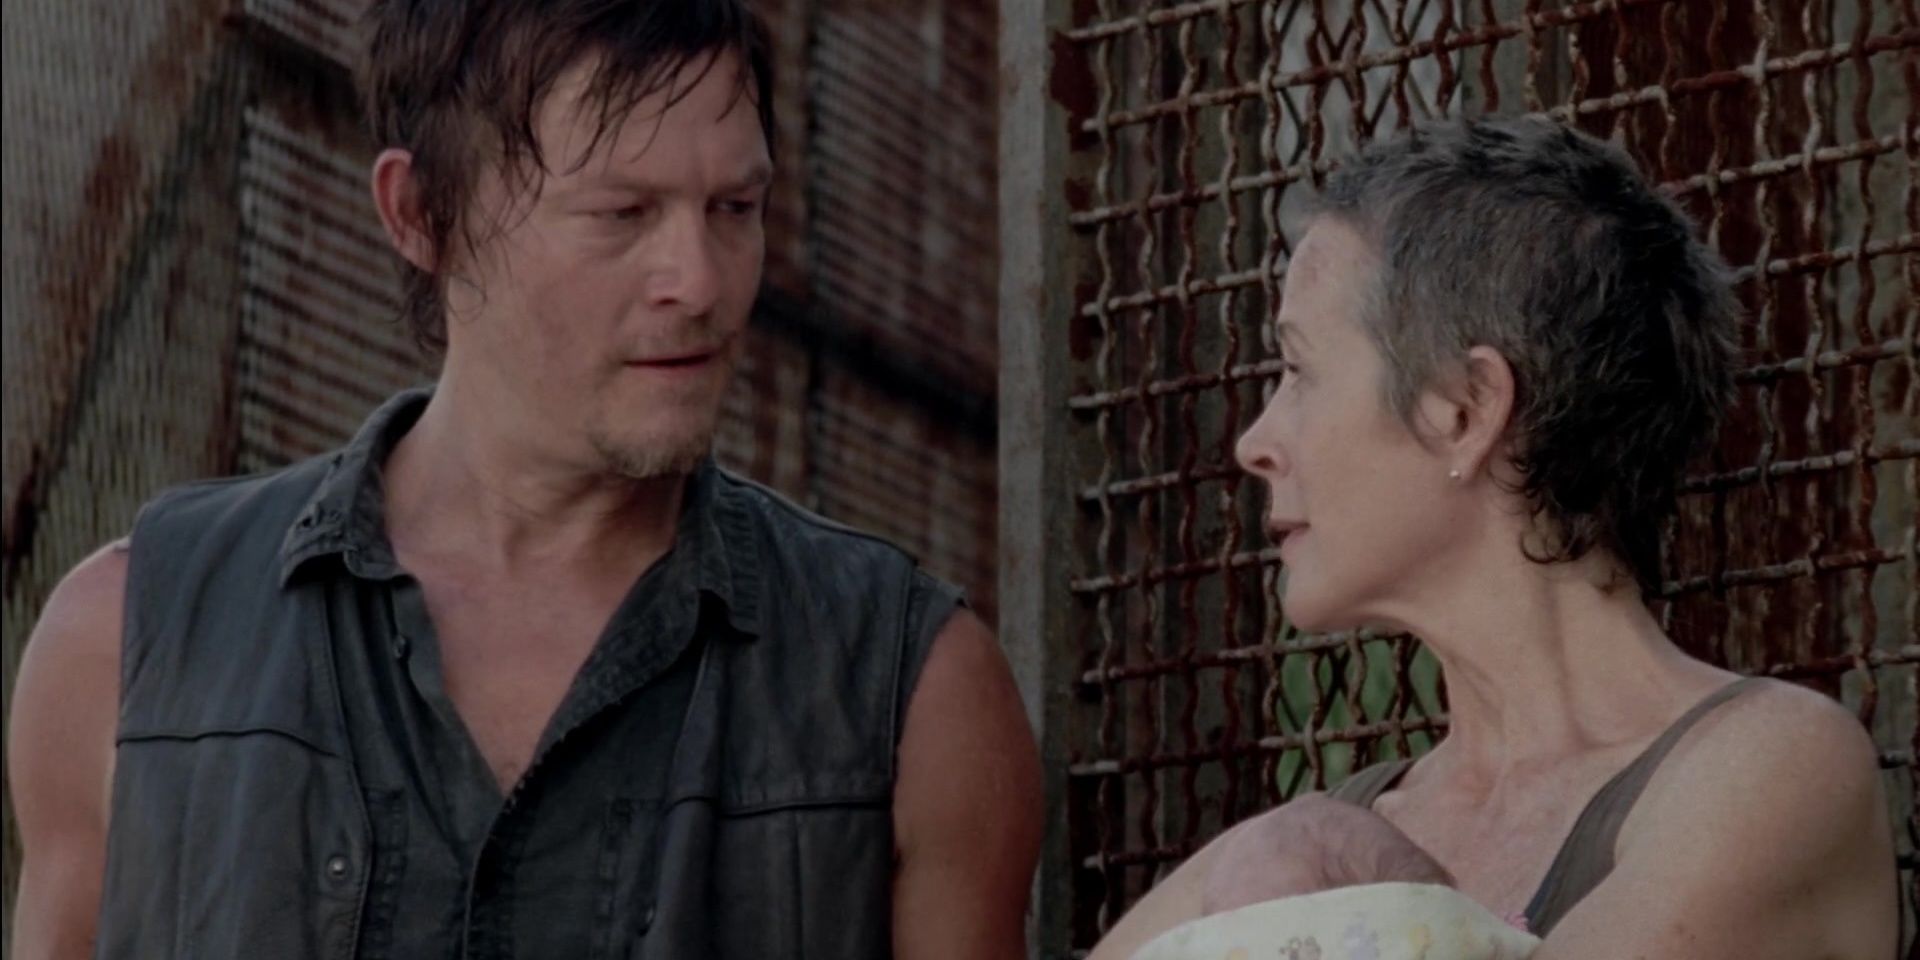 Daryl and Carol with Judith in Season 3 Episode 7 of The Walking Dead